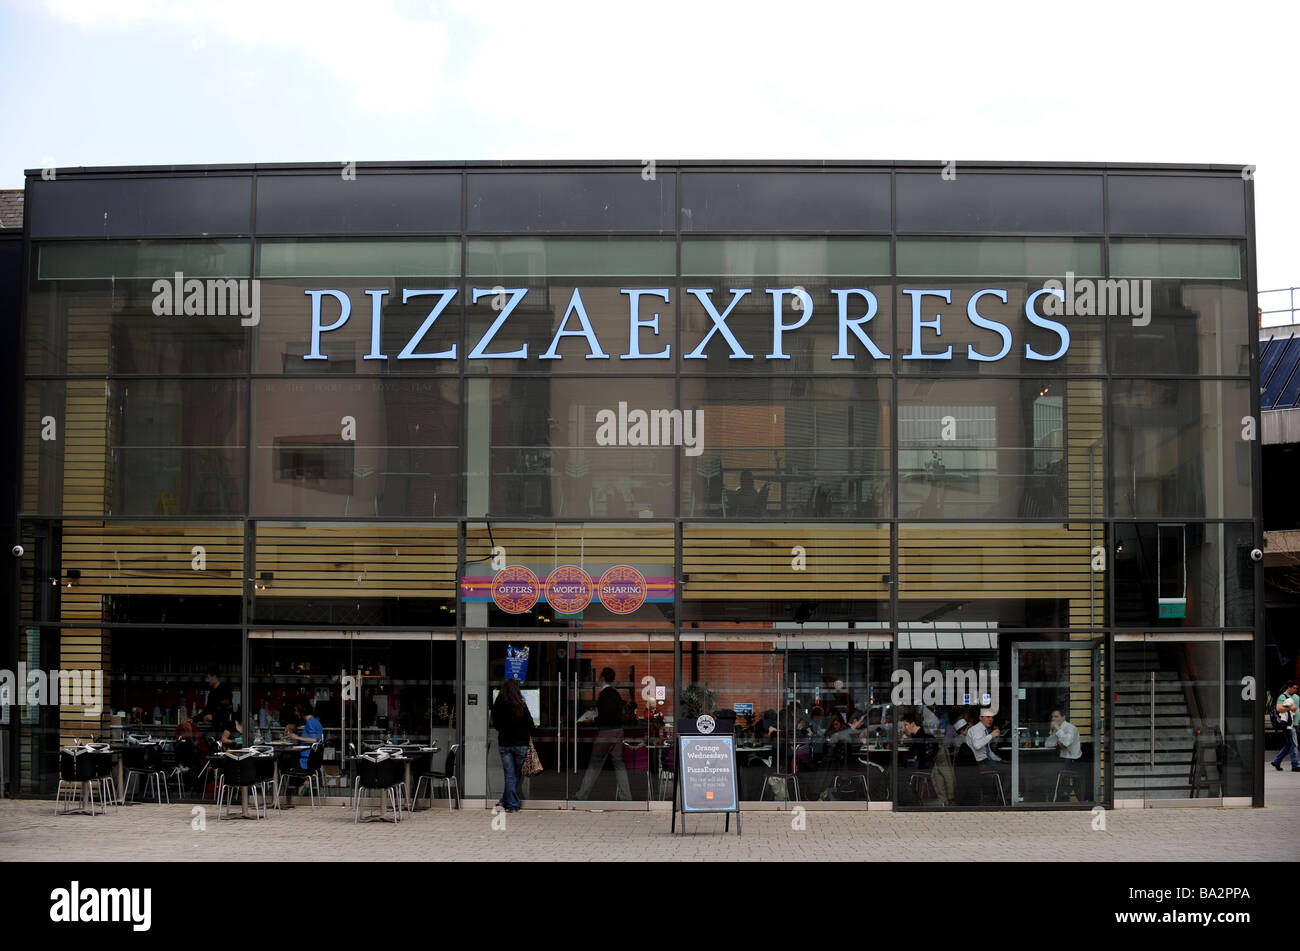 The glass front of a pizza express restaurant in brighton's jubilee square Stock Photo